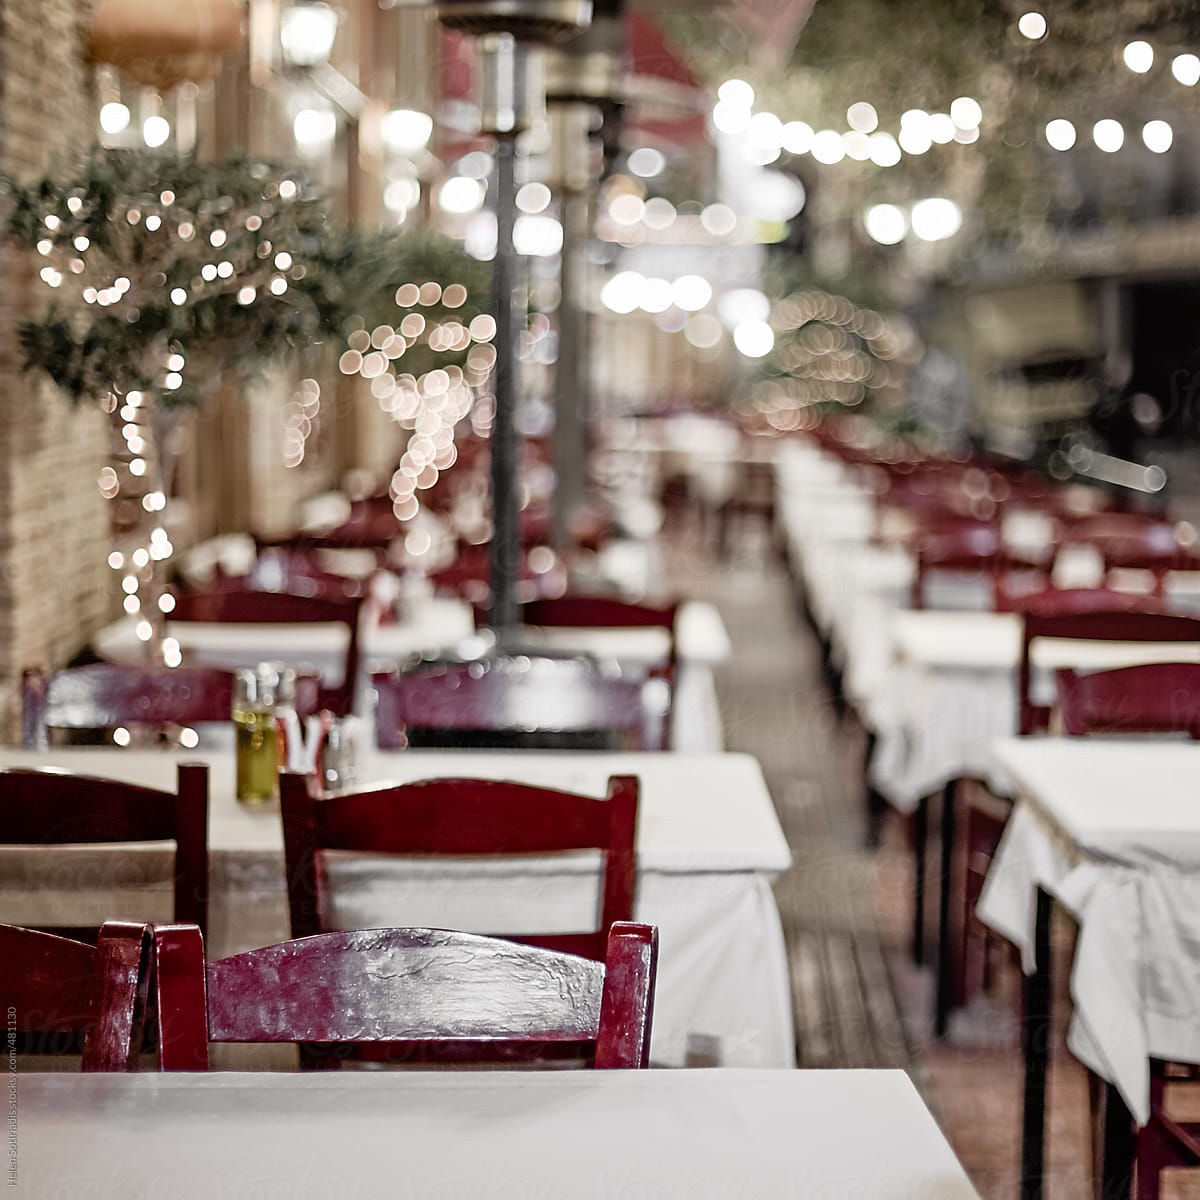 An Outdoor Restaurant Decorated with Christmas Lights in Greece